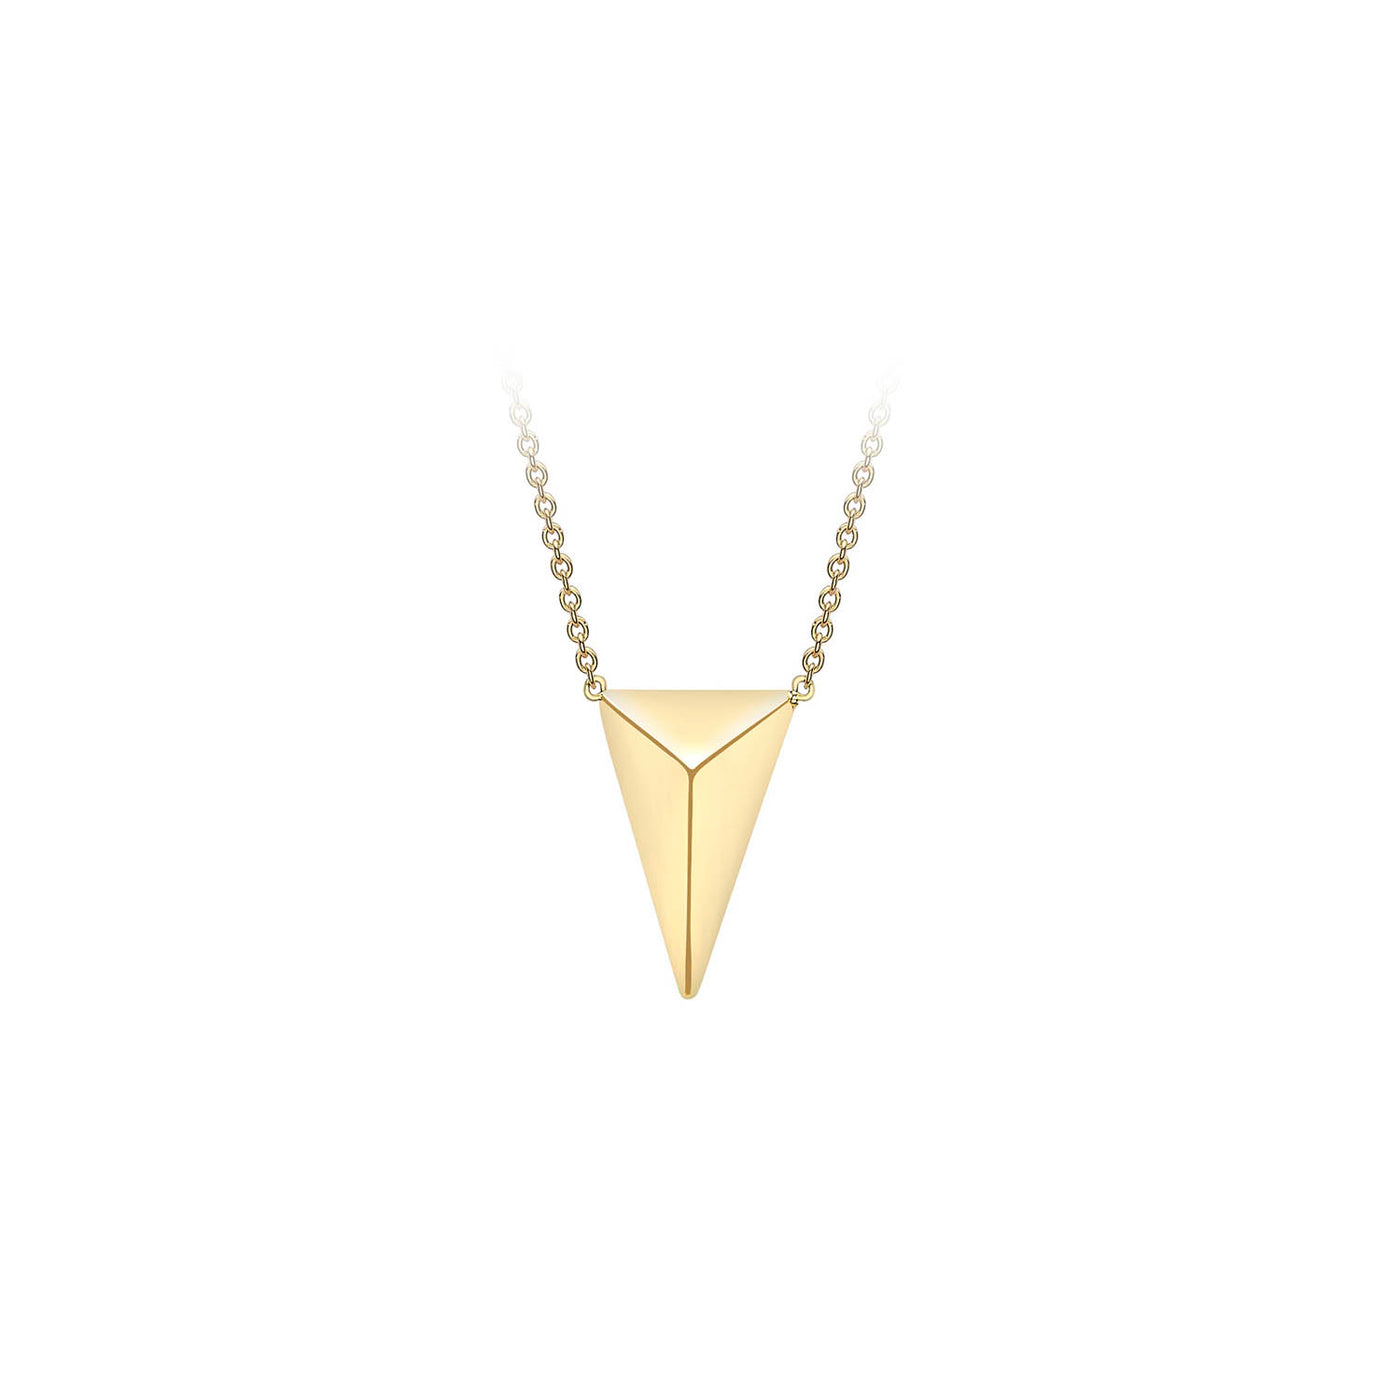 9k Yellow Gold Pyramid Necklace